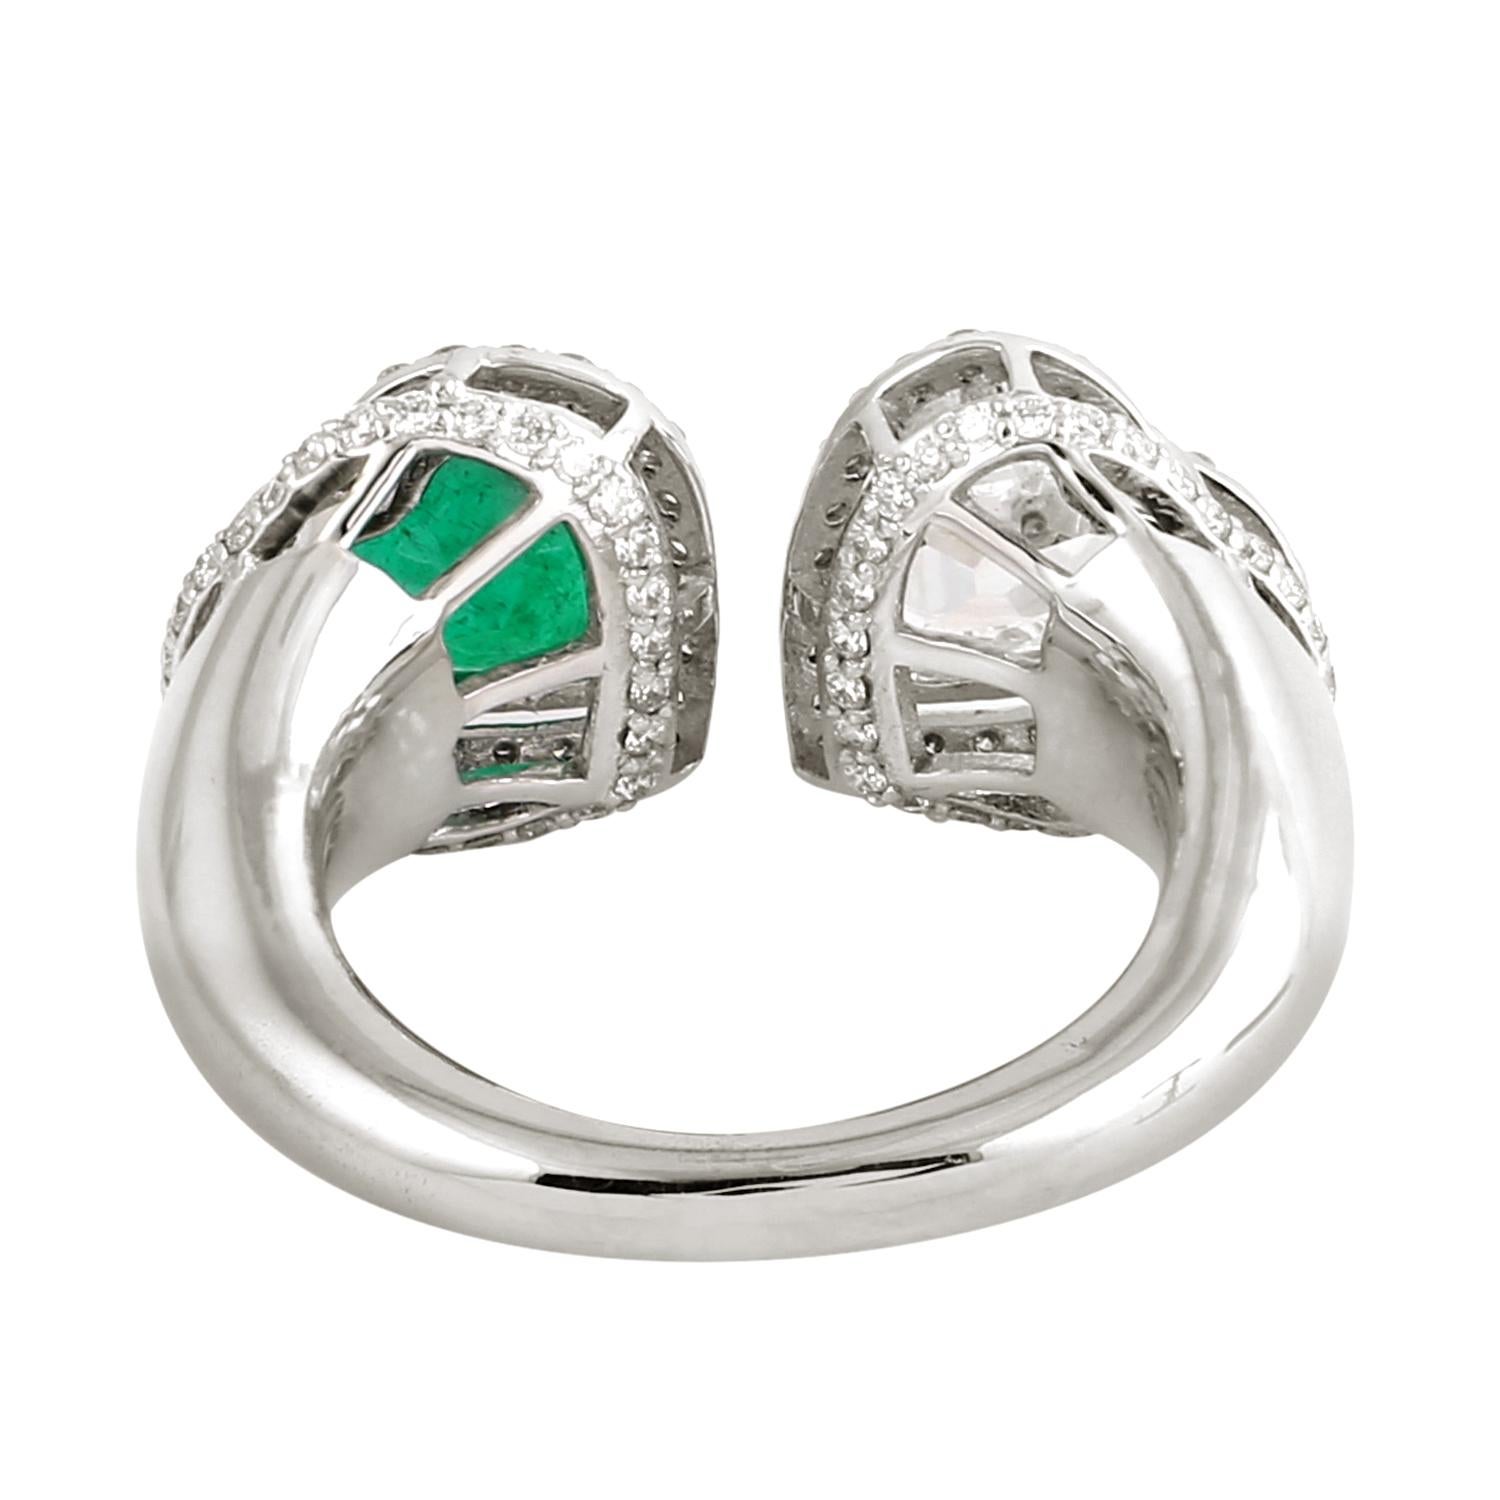 Contemporary Heart Shape Emerald & Diamond Toi Et Moi Ring Made In 18k White Gold For Sale